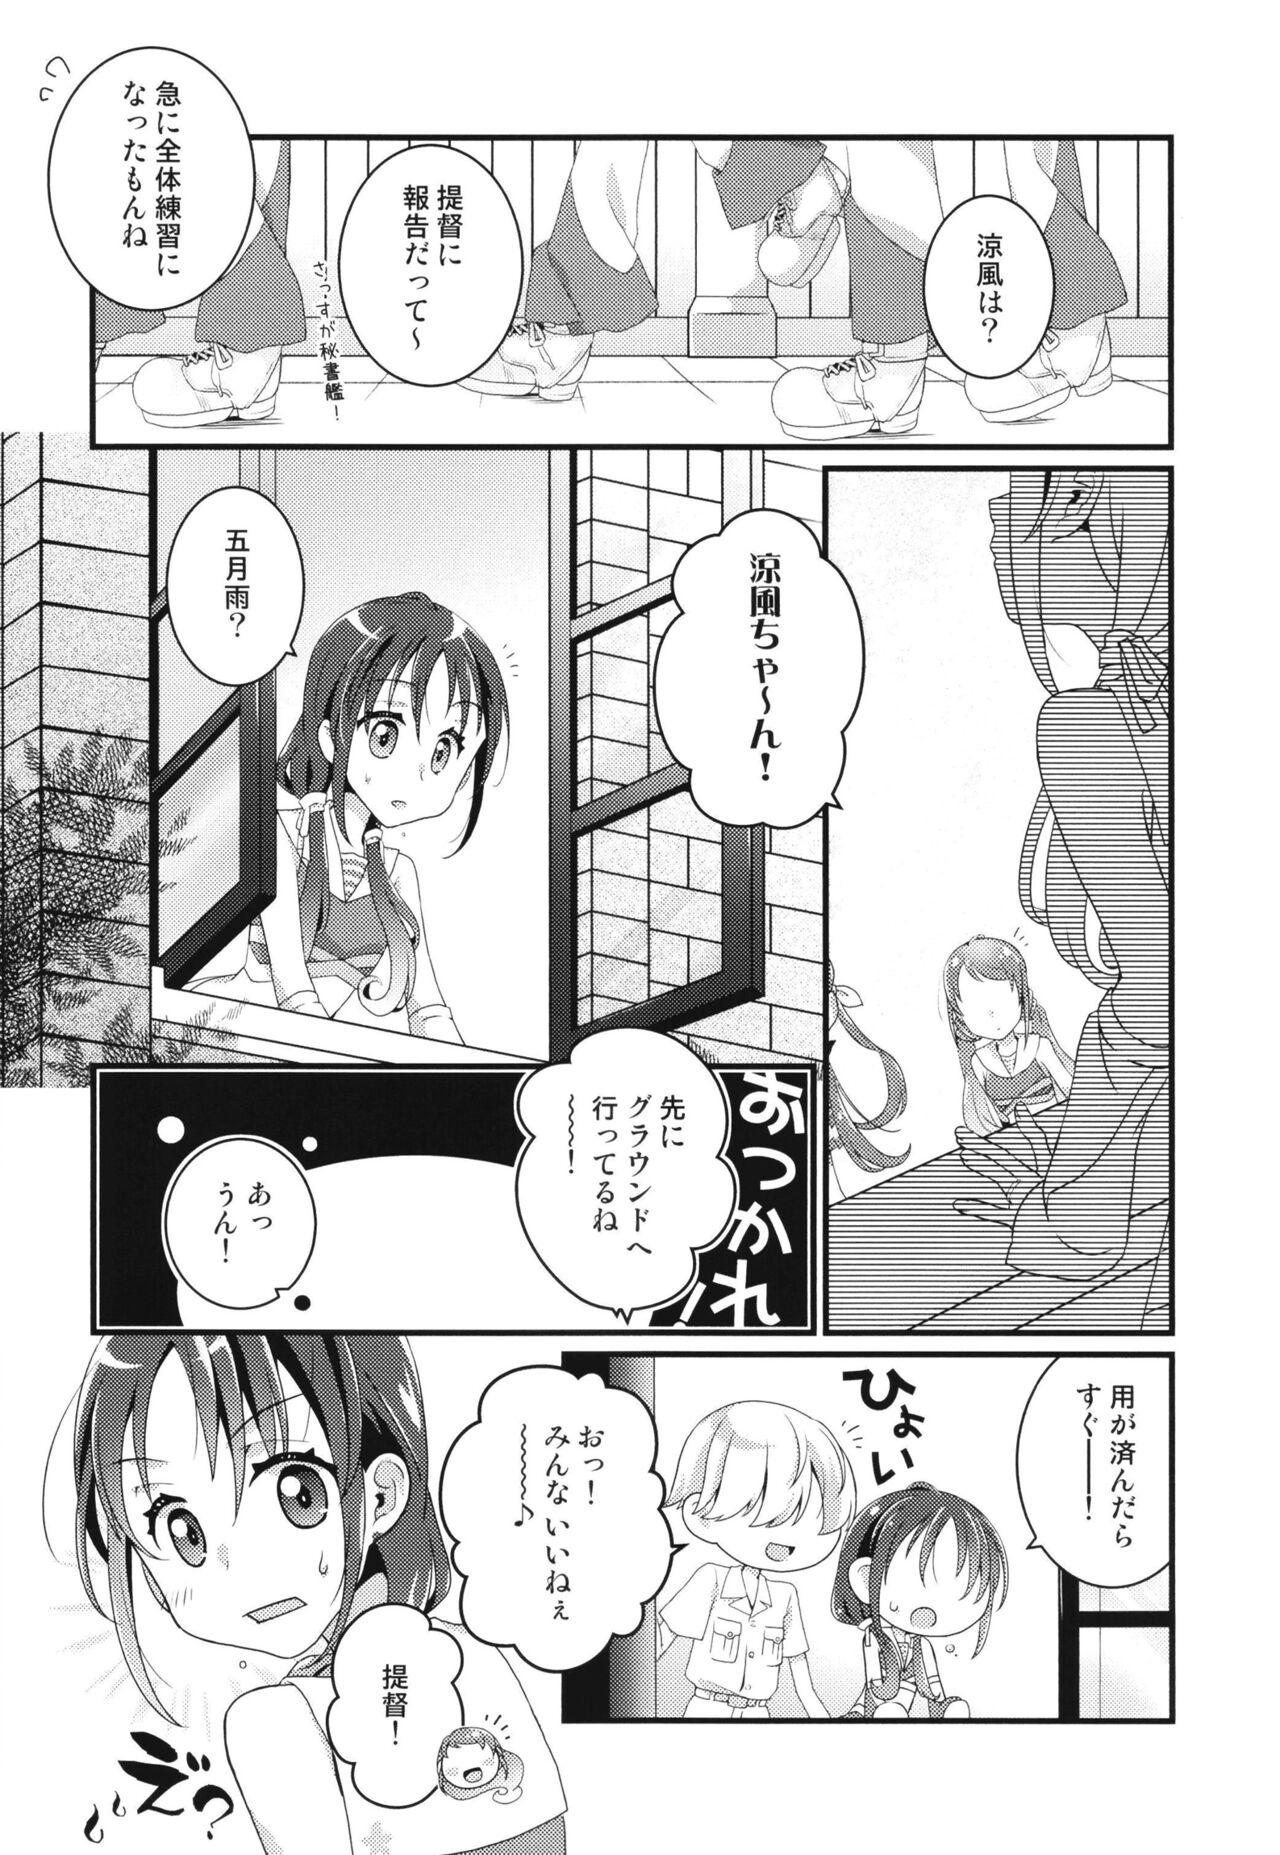 Interview Yah! Cheer! yeah! - Kantai collection Twistys - Page 4